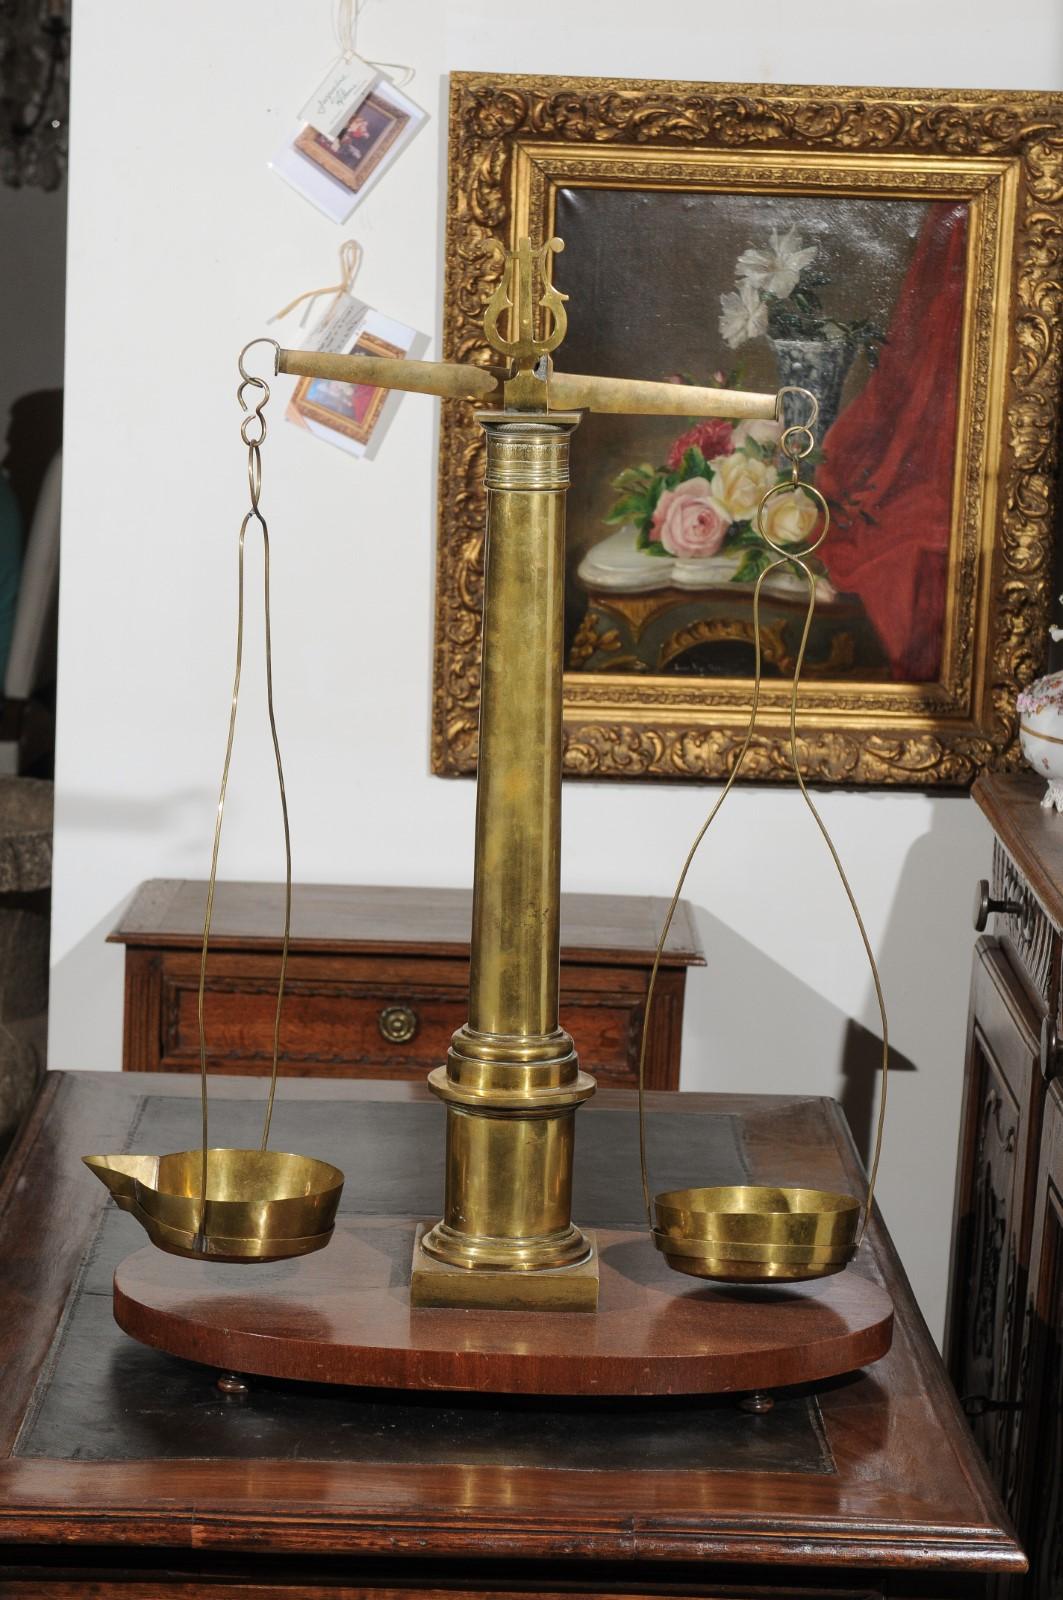 An English brass herbalist scale from the 19th century, with column and lyre details, mounted on a wooden base. Used to measure herbs, this exquisite scale features a brass structure presenting a central column adorned with a capital topped with a